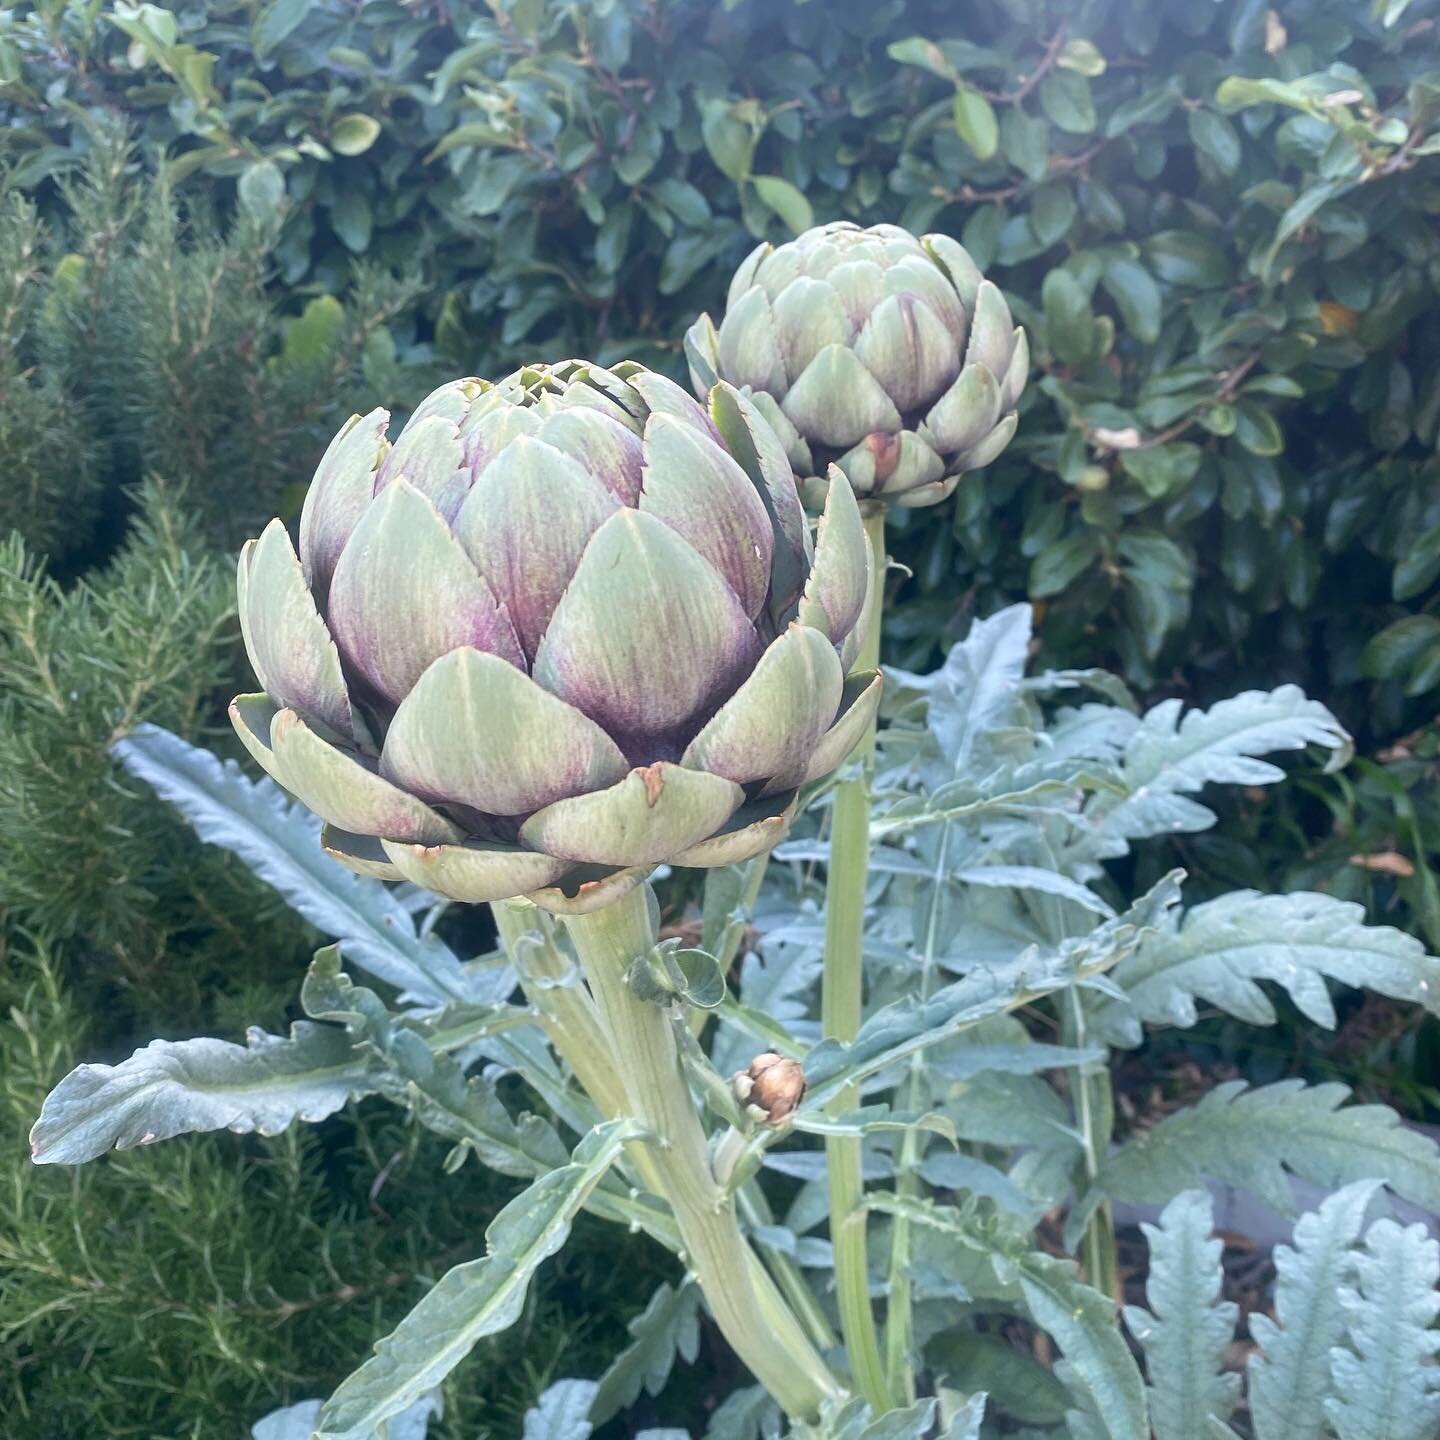 Intimidated? (You&rsquo;re not alone!)

Artichokes are weird! But beautiful, and very health promoting!

If you don&rsquo;t know how to eat one, we&rsquo;re here to help show you the ropes&hellip; As well as give you the download on some this beauty&